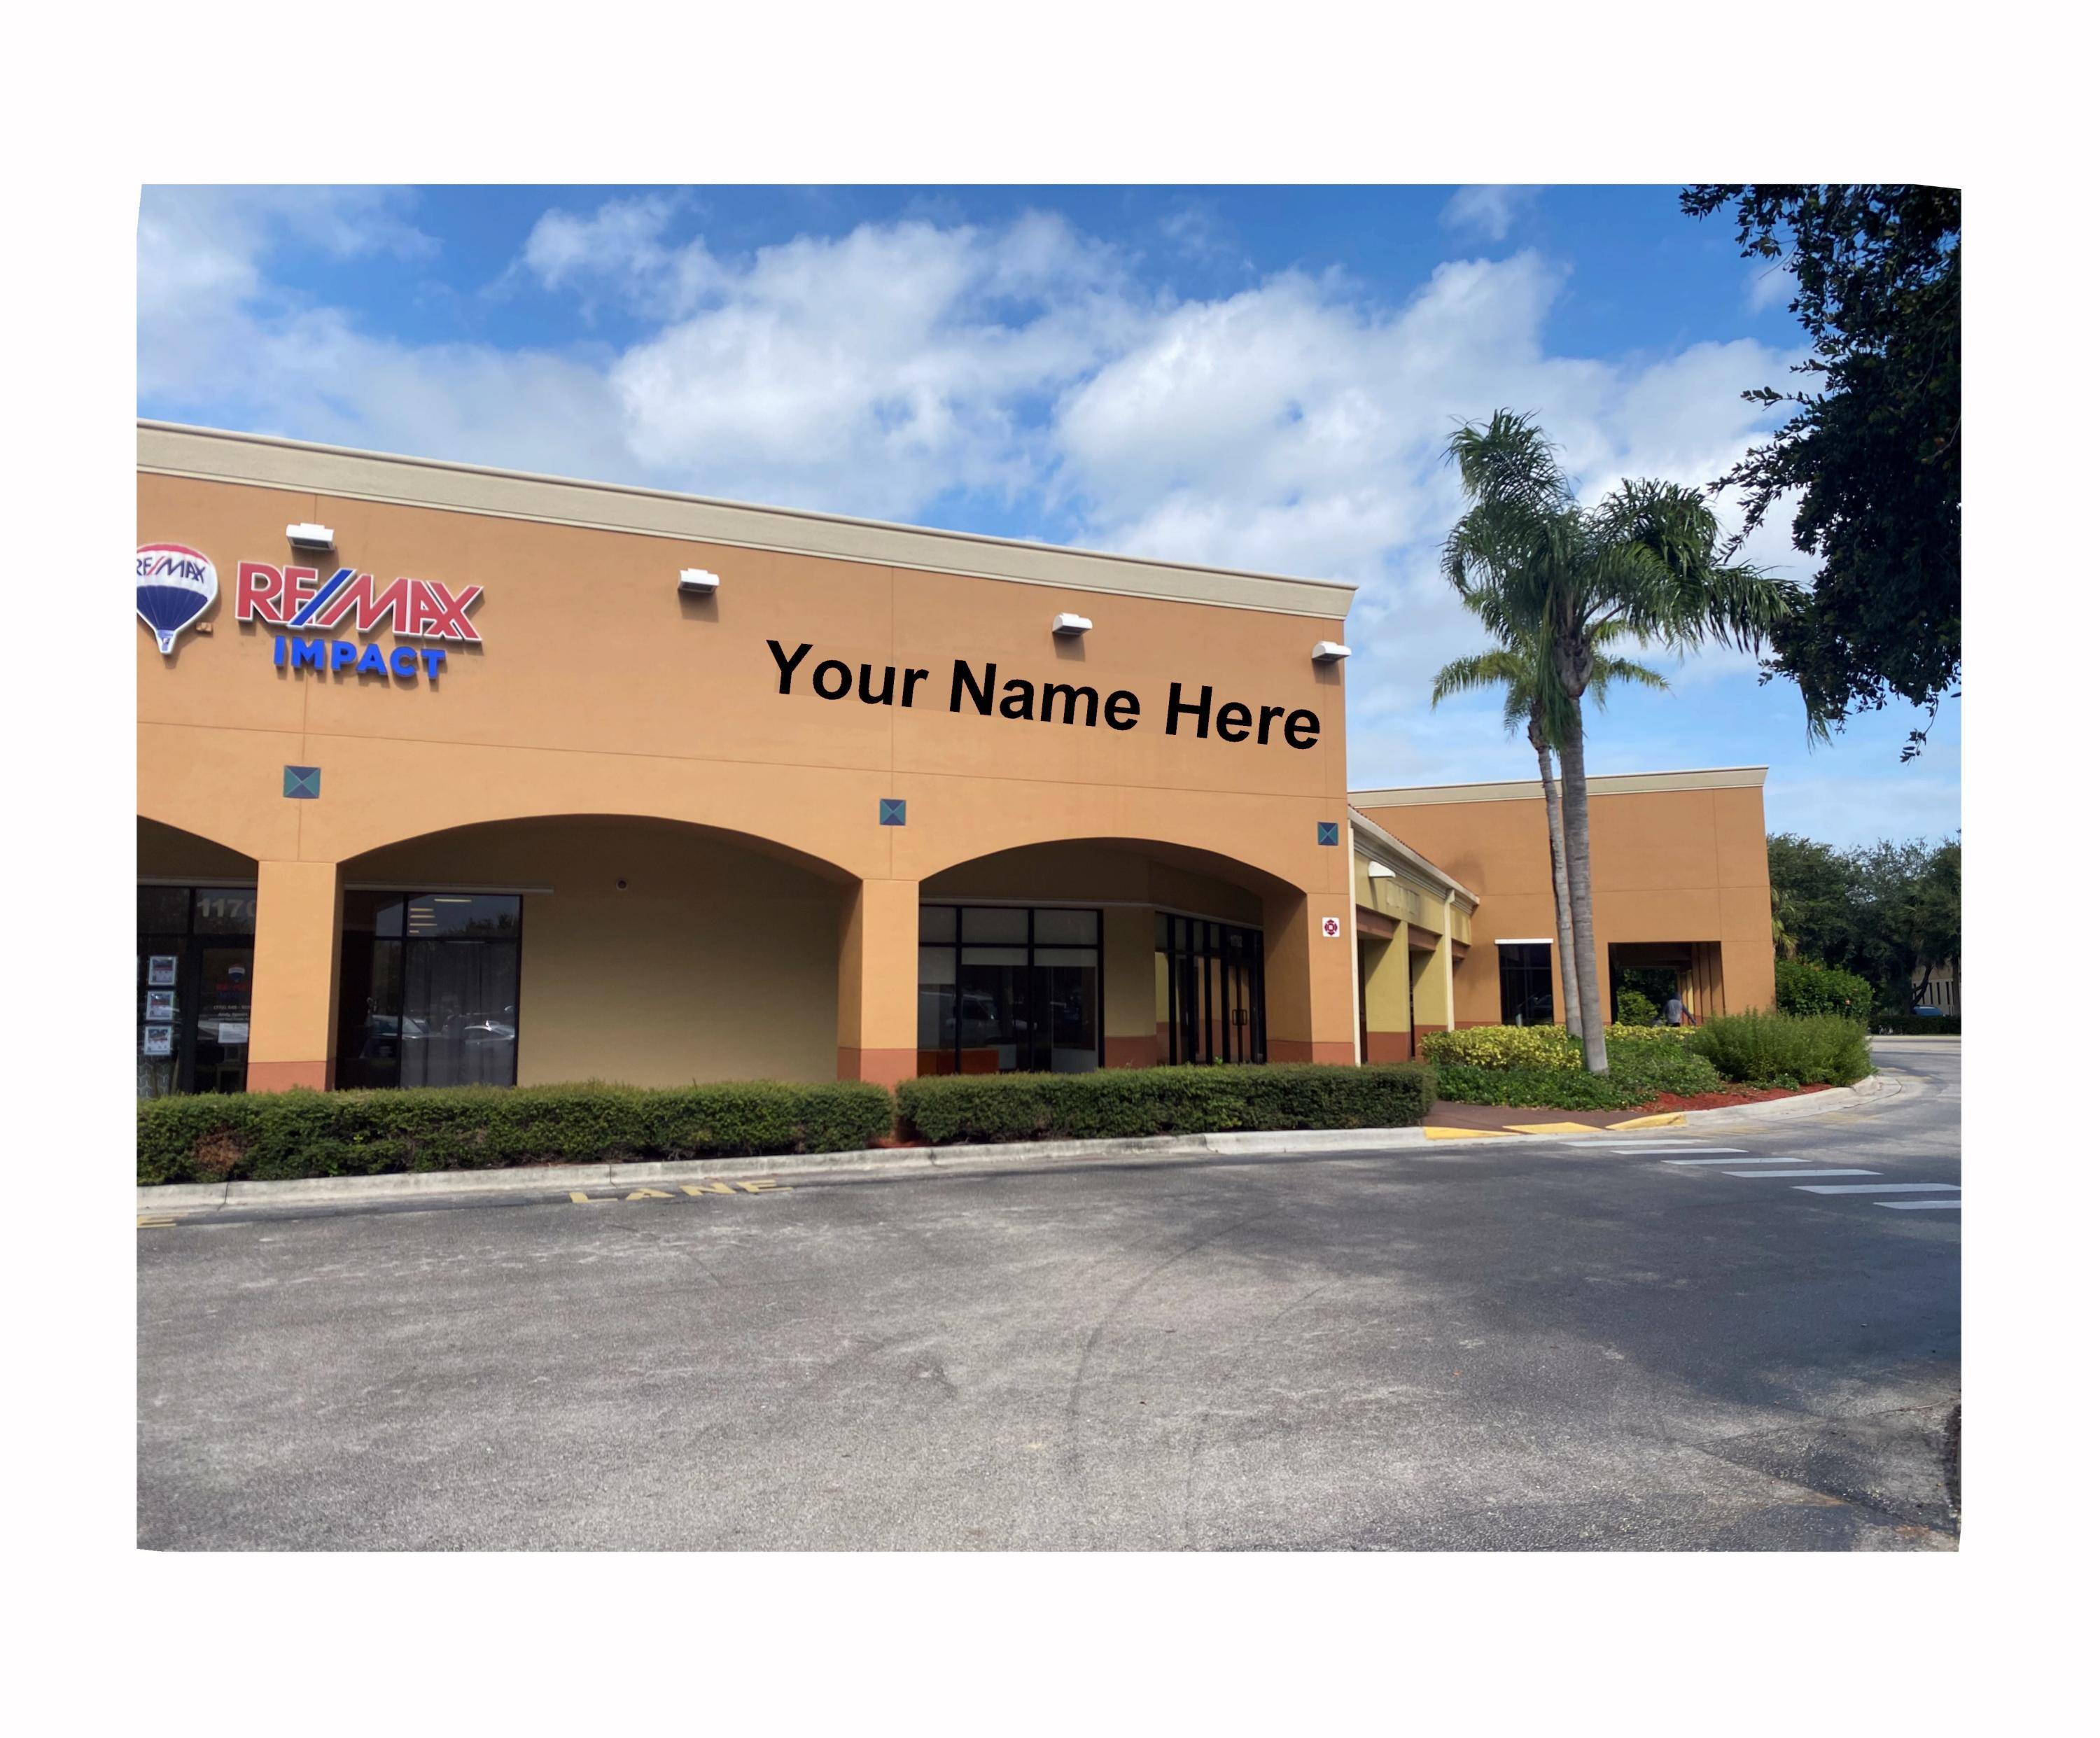 Rental unit available for lease in the extremely busy Publix anchored Island Crossing community shopping center situated at US Hwy 1 and Bridge Road intersection.